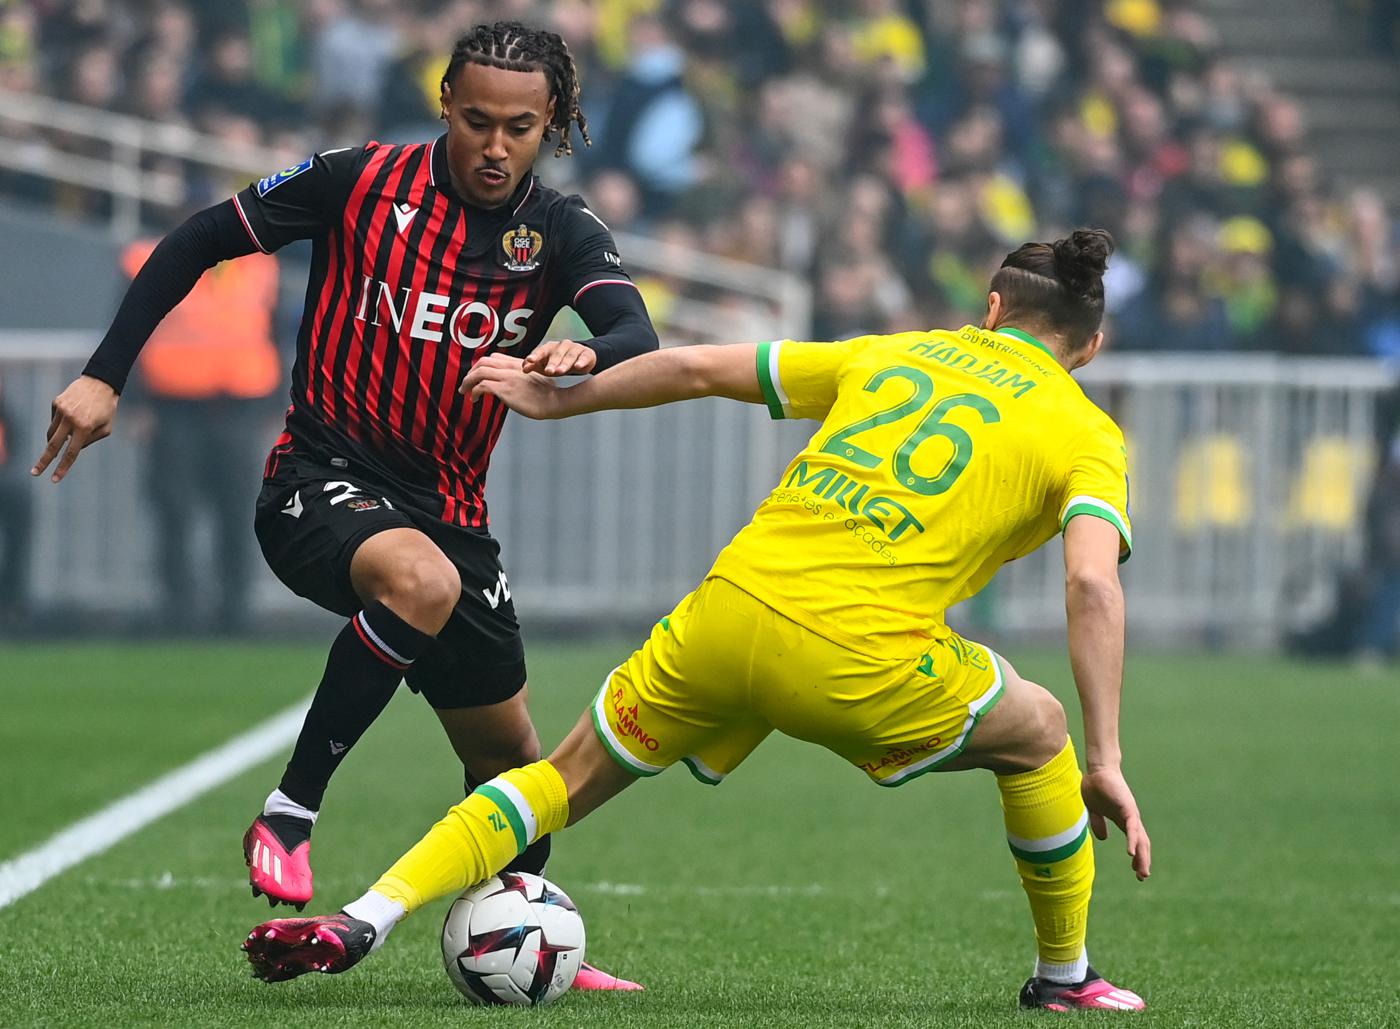 Nantes - Nice - 2:2. French Championship, 27th round. Match review, statistics.